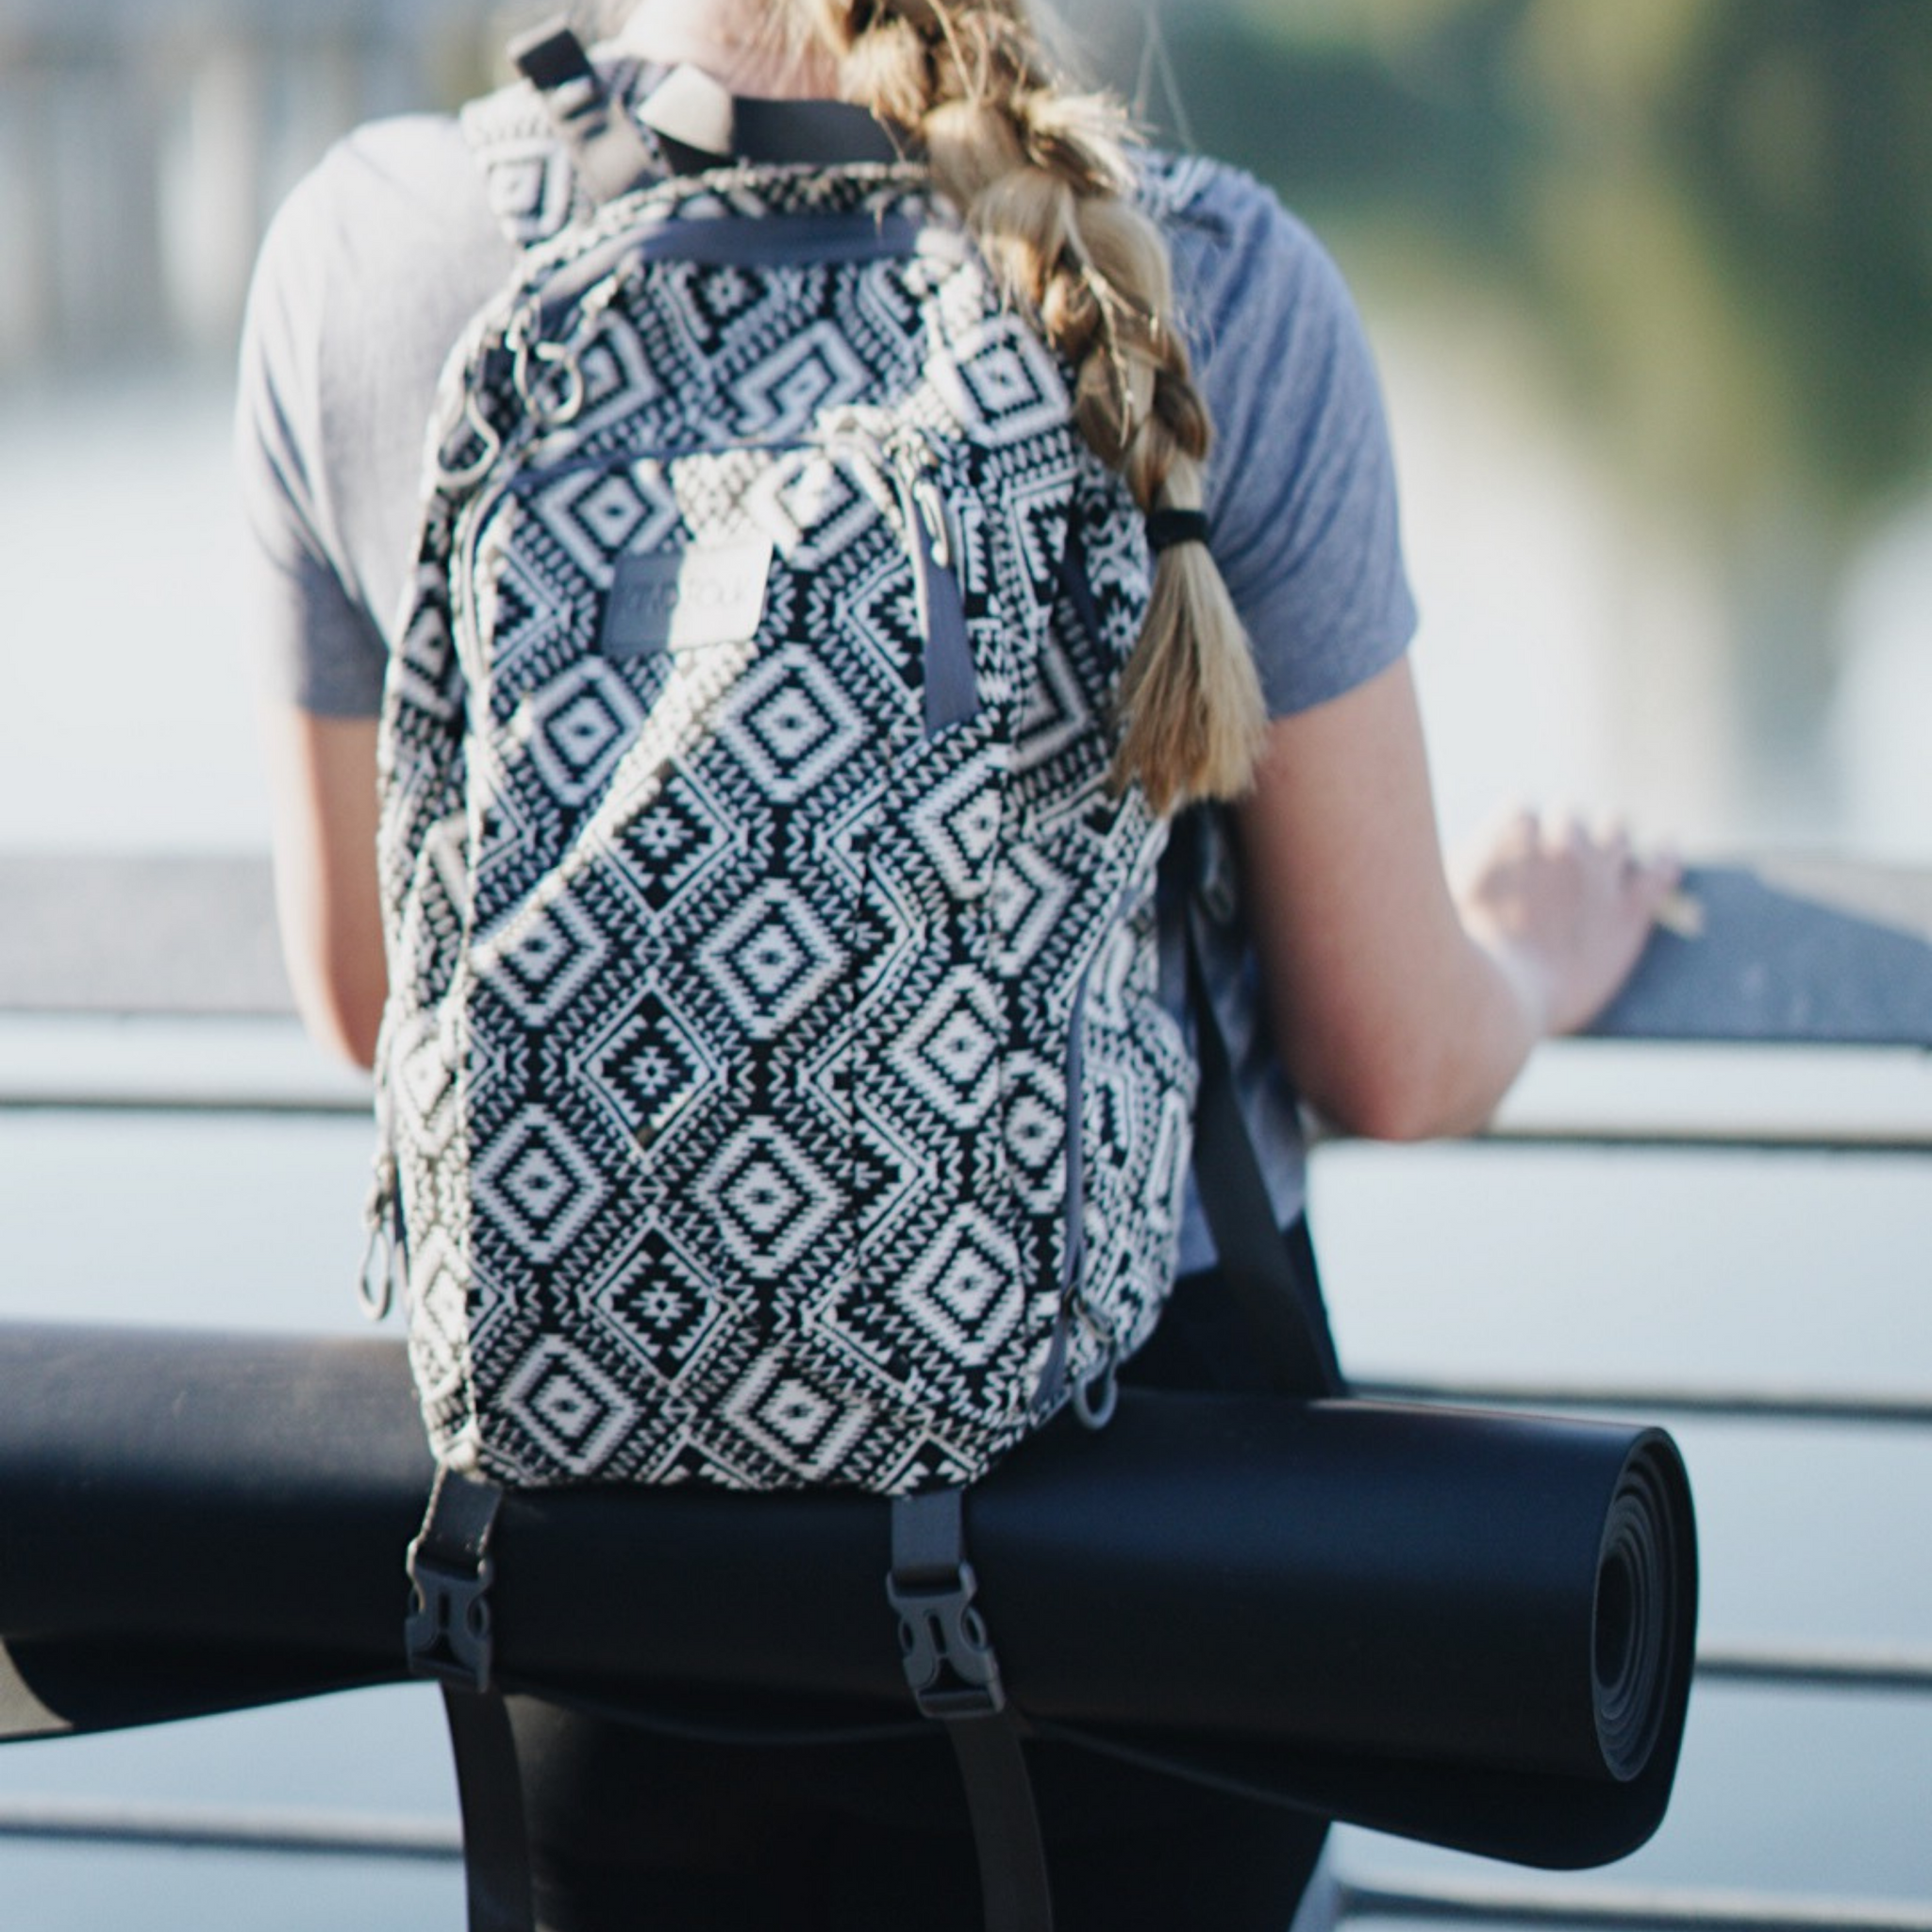 Yoga Mat Backpack - Yoga-Mad - Great For Commuting